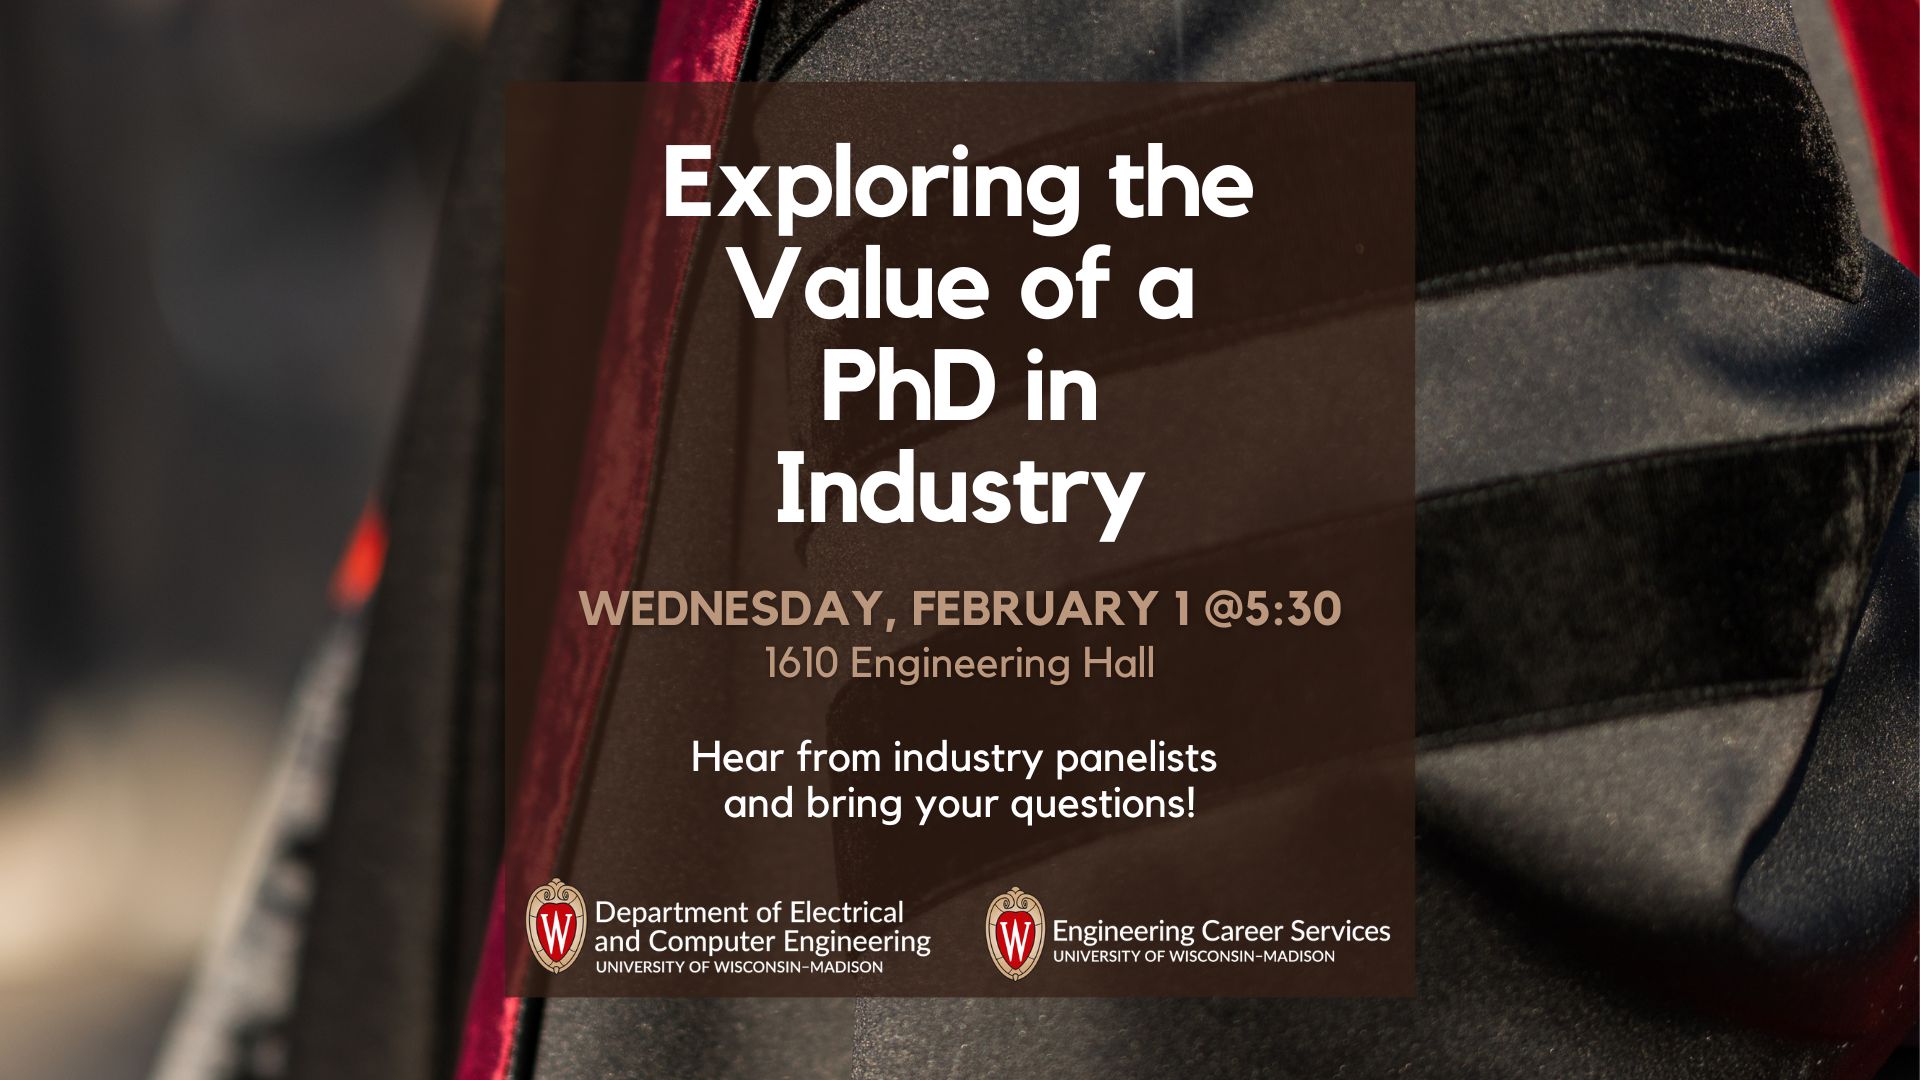 PhD graduation robe with text: Exploring the Value of a PhD in Industry, Wednesday, February 1 @ 5:30, 1610 Engineering Hall, Hear from industry panelists and bring your questions! Department of Electrical and Computer Engineering, Engineering Career Services